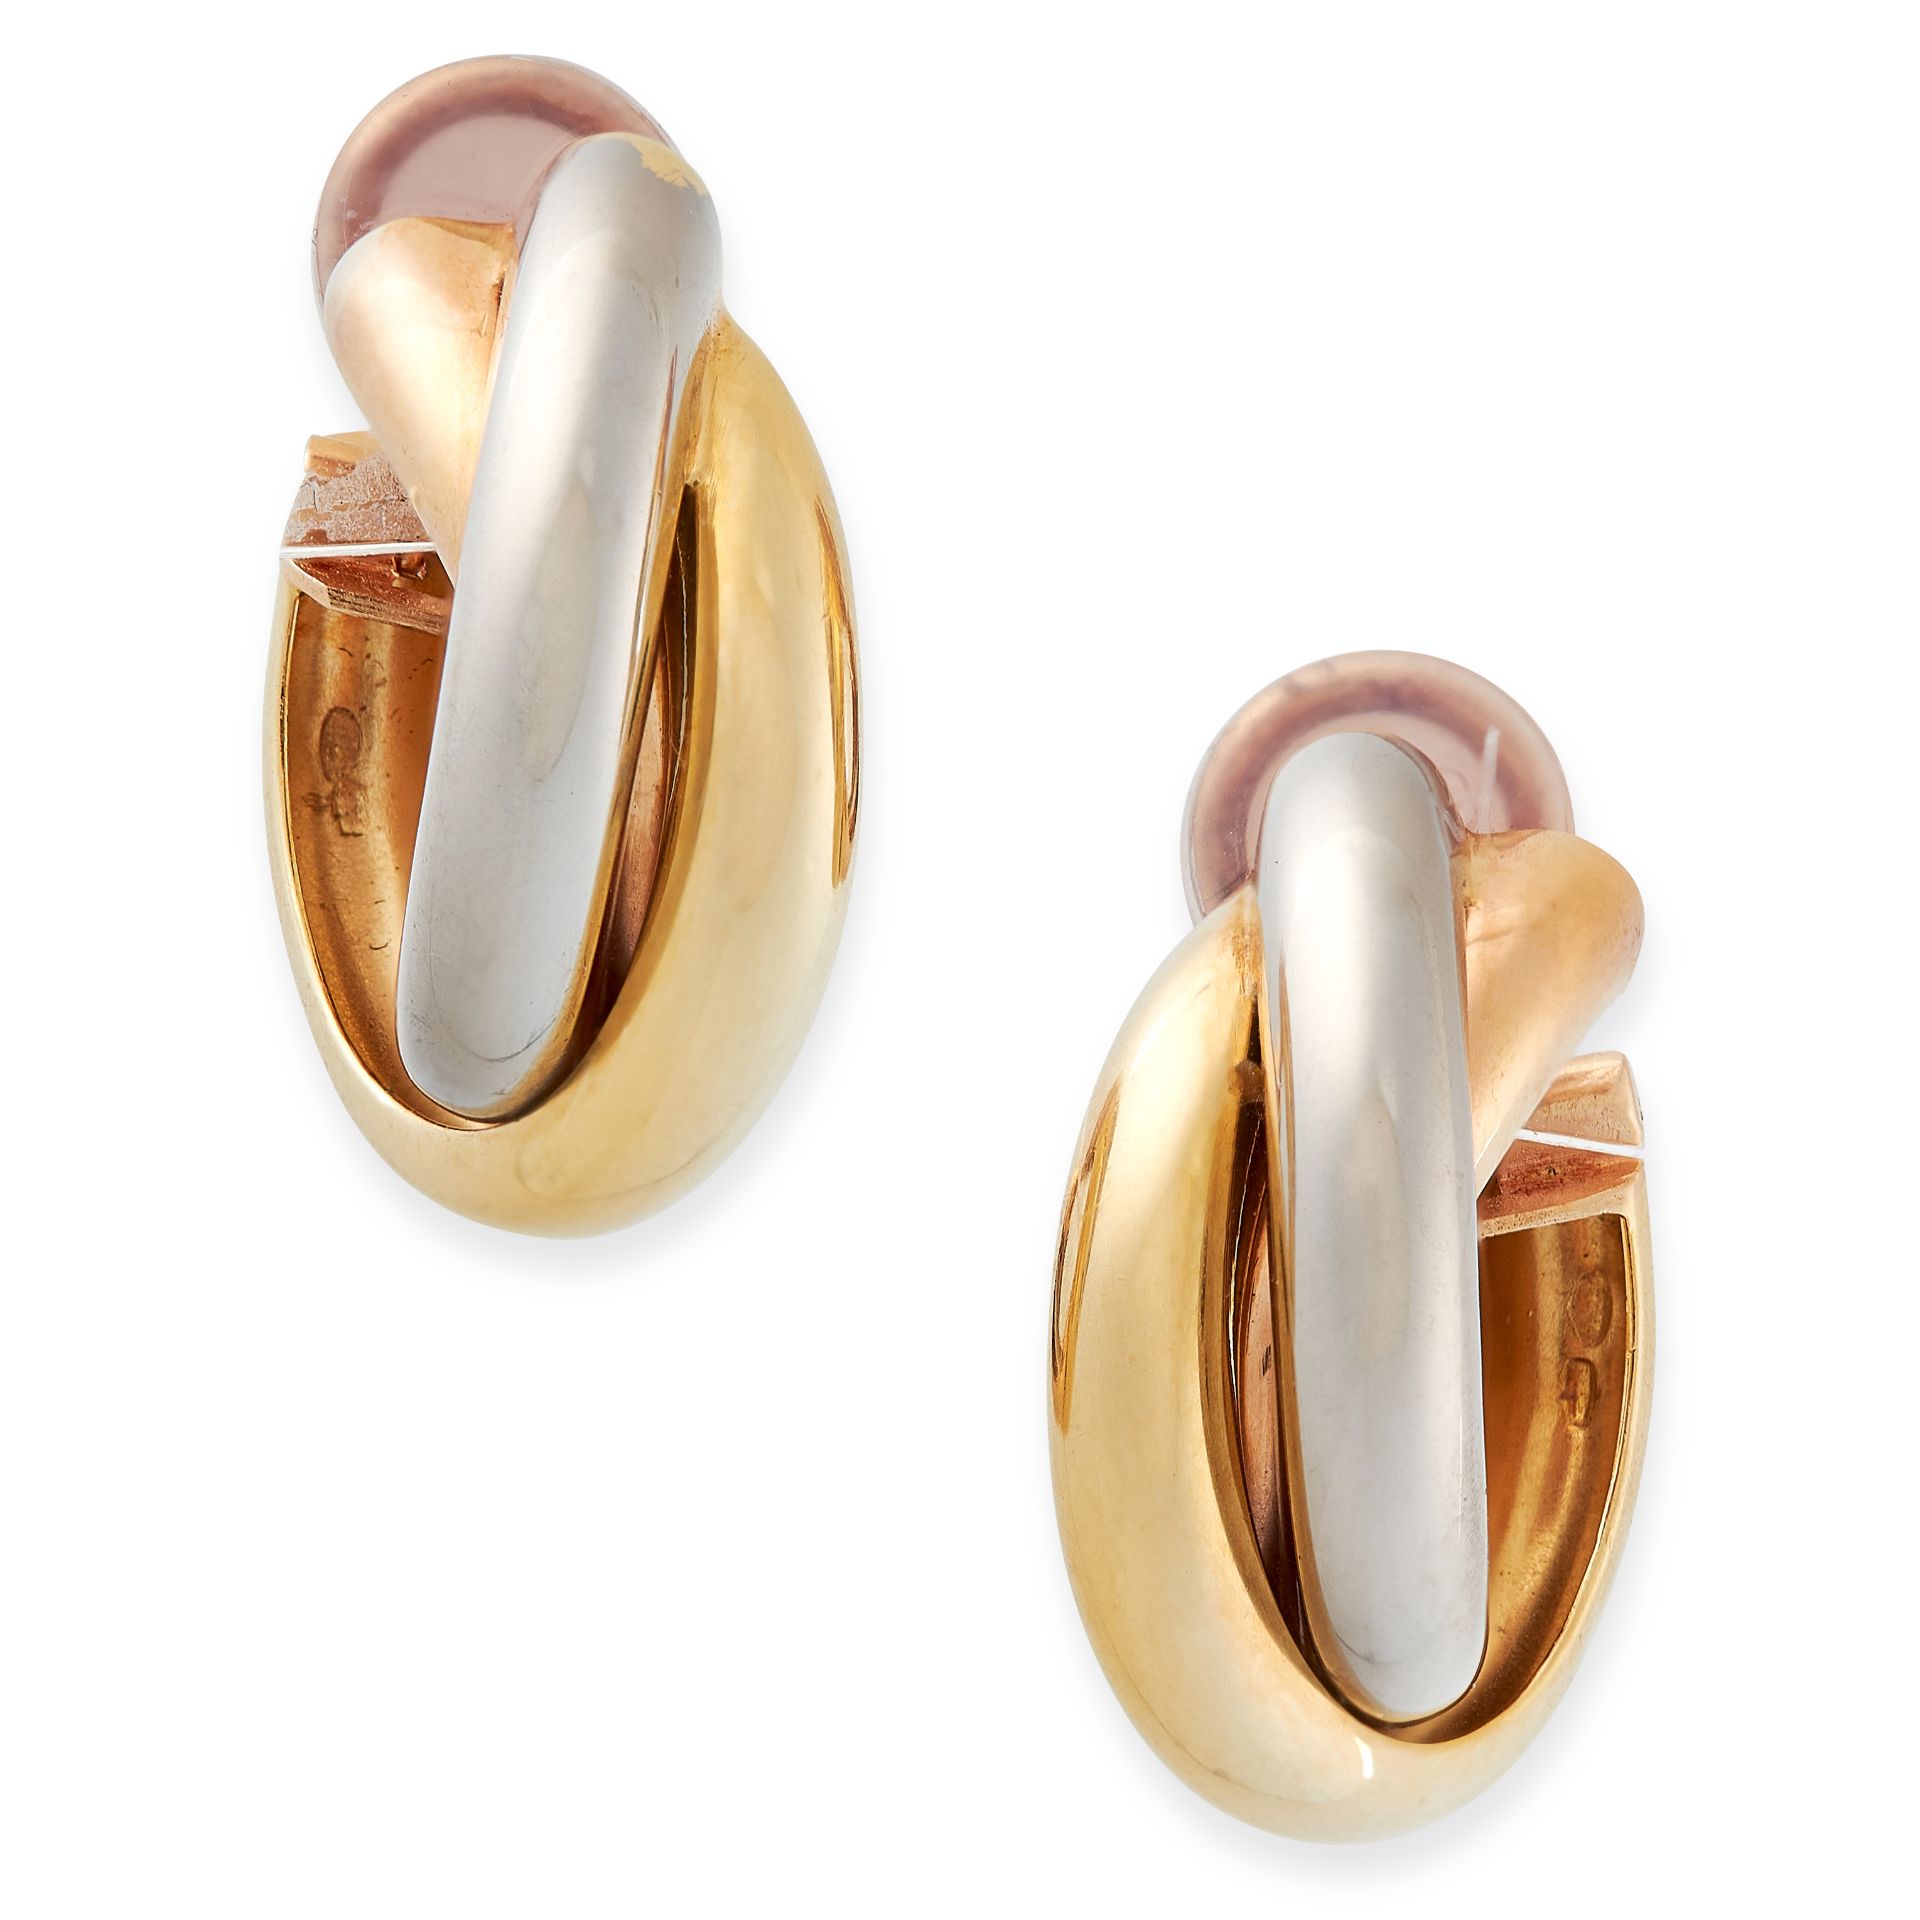 A PAIR OF TRINITY DE CARITER HOOP CLIP EARRINGS, CARTIER in 18ct gold, each designed as a trio of